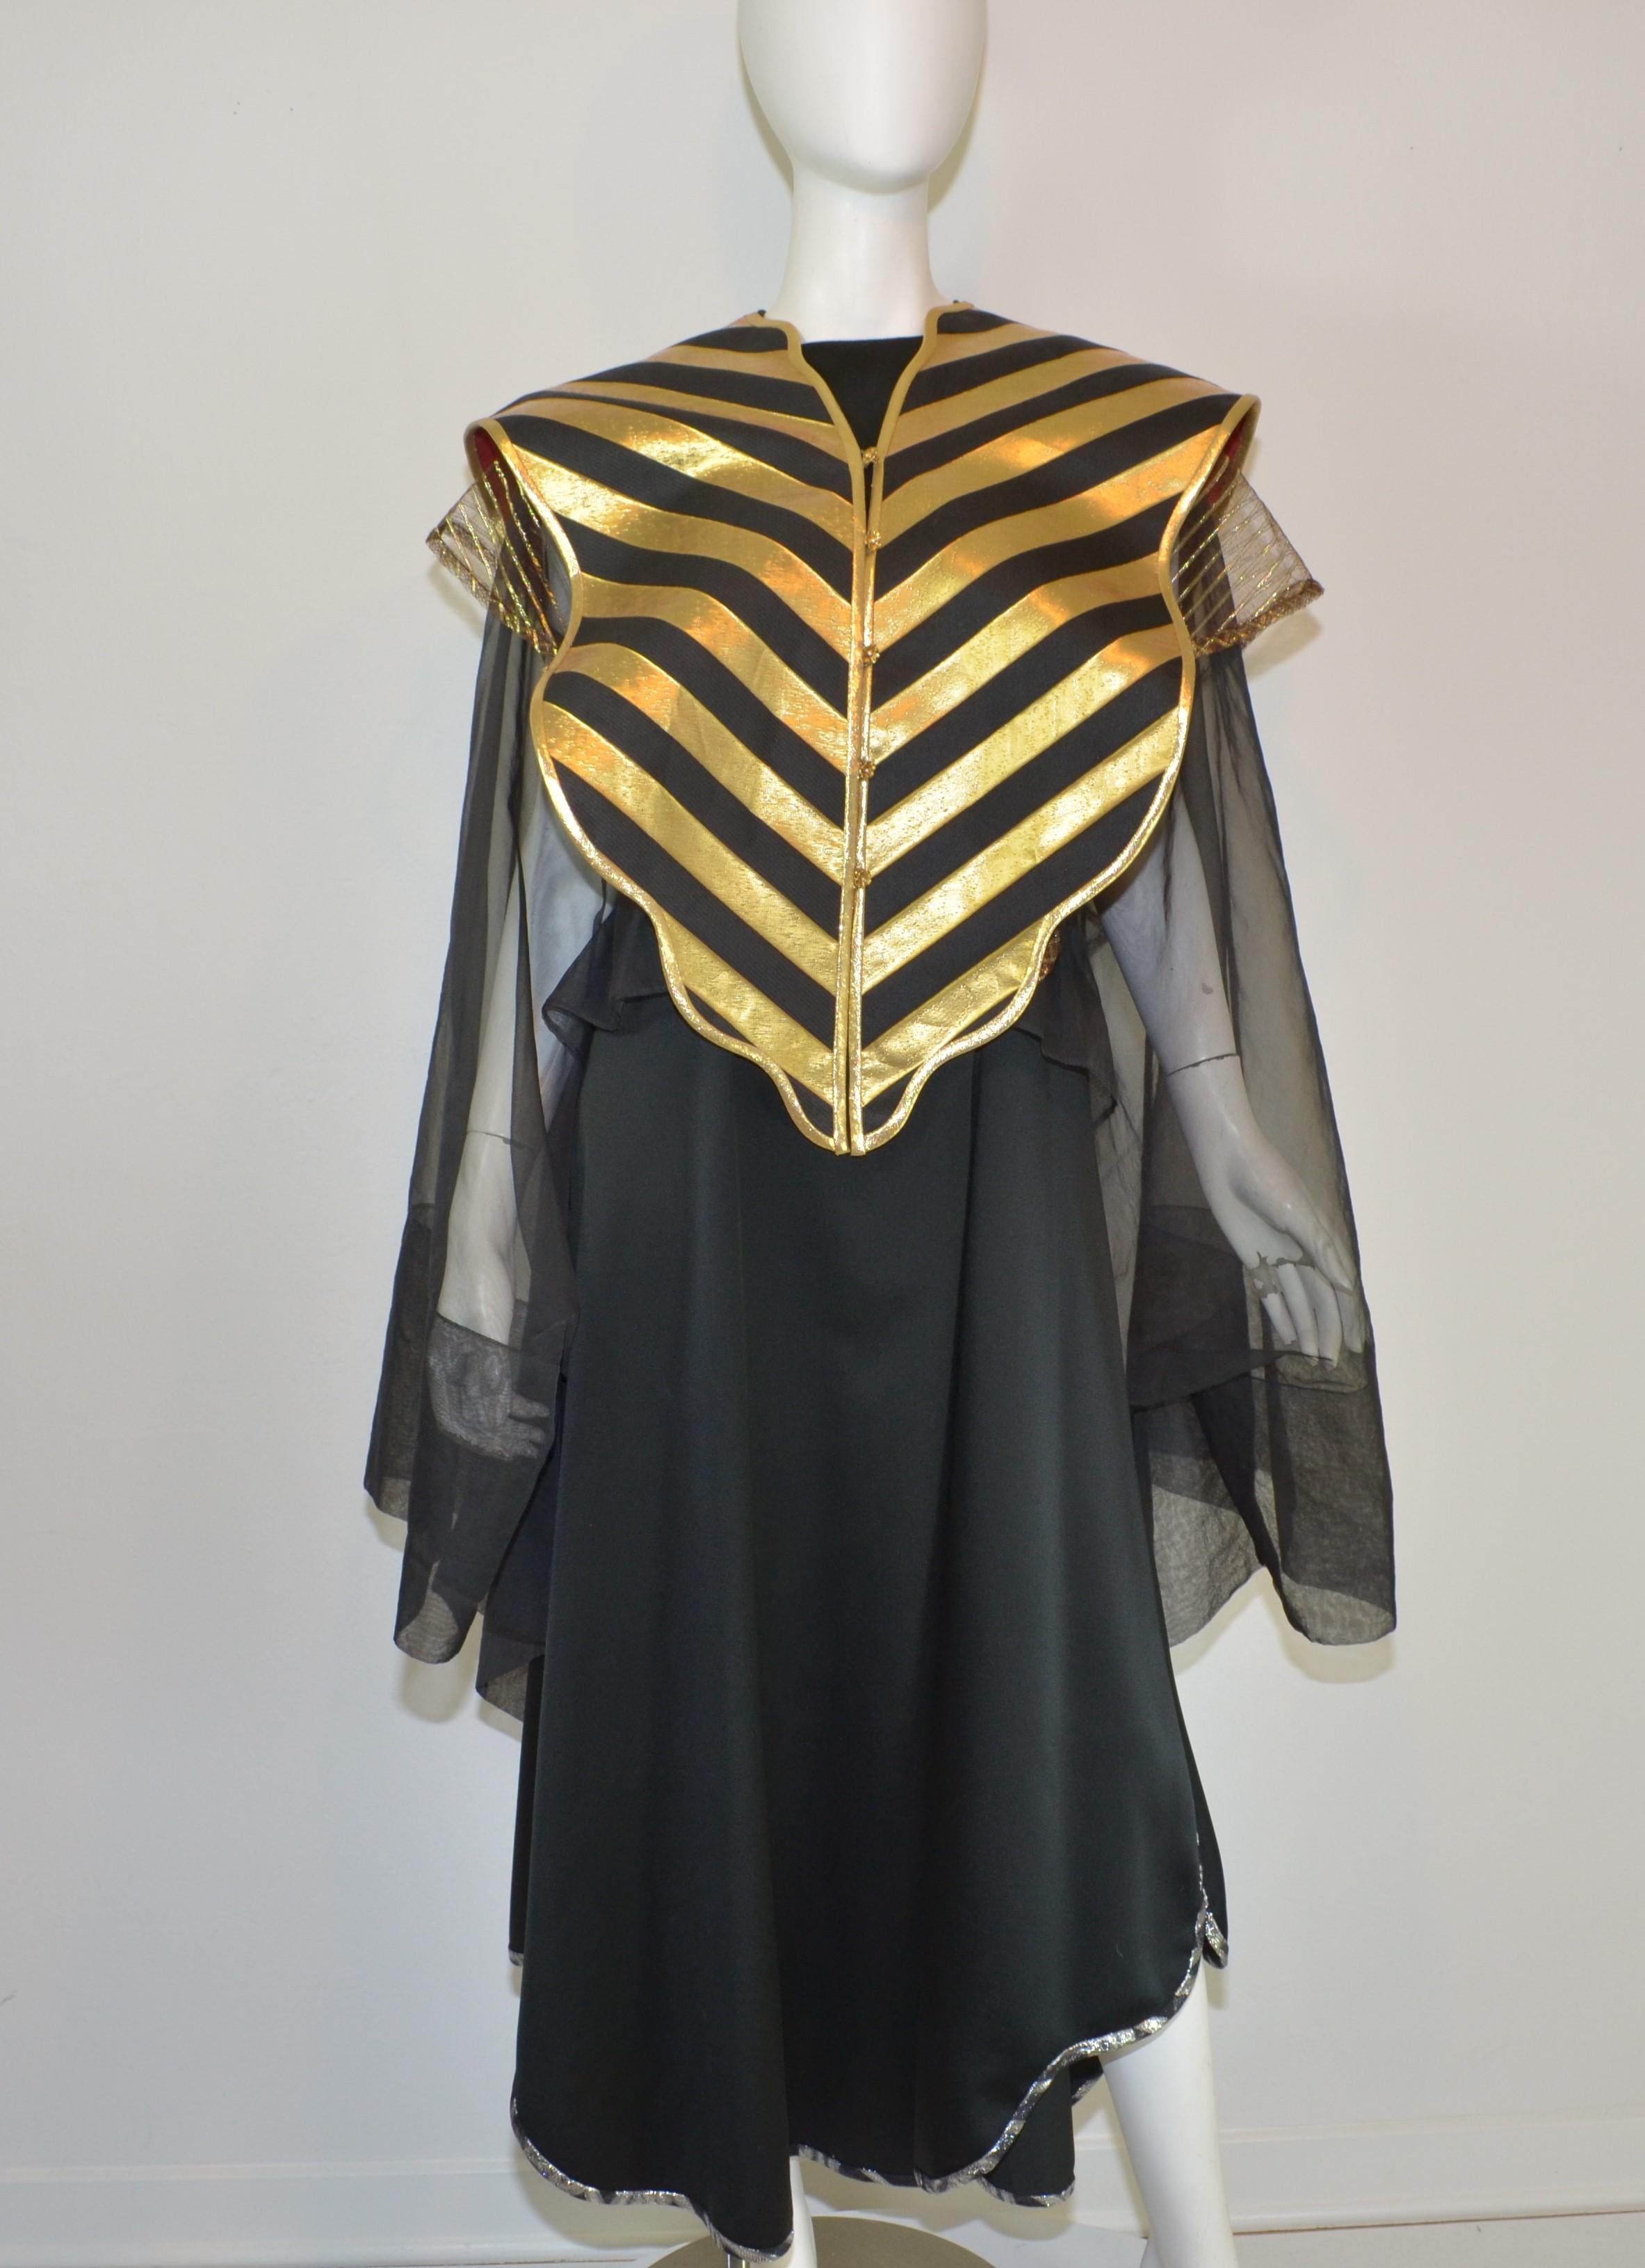  Kaisik Wong “Cobra” Art to Wear Ensemble with Black Dress and Apron, Obiko In Excellent Condition In Carmel, CA